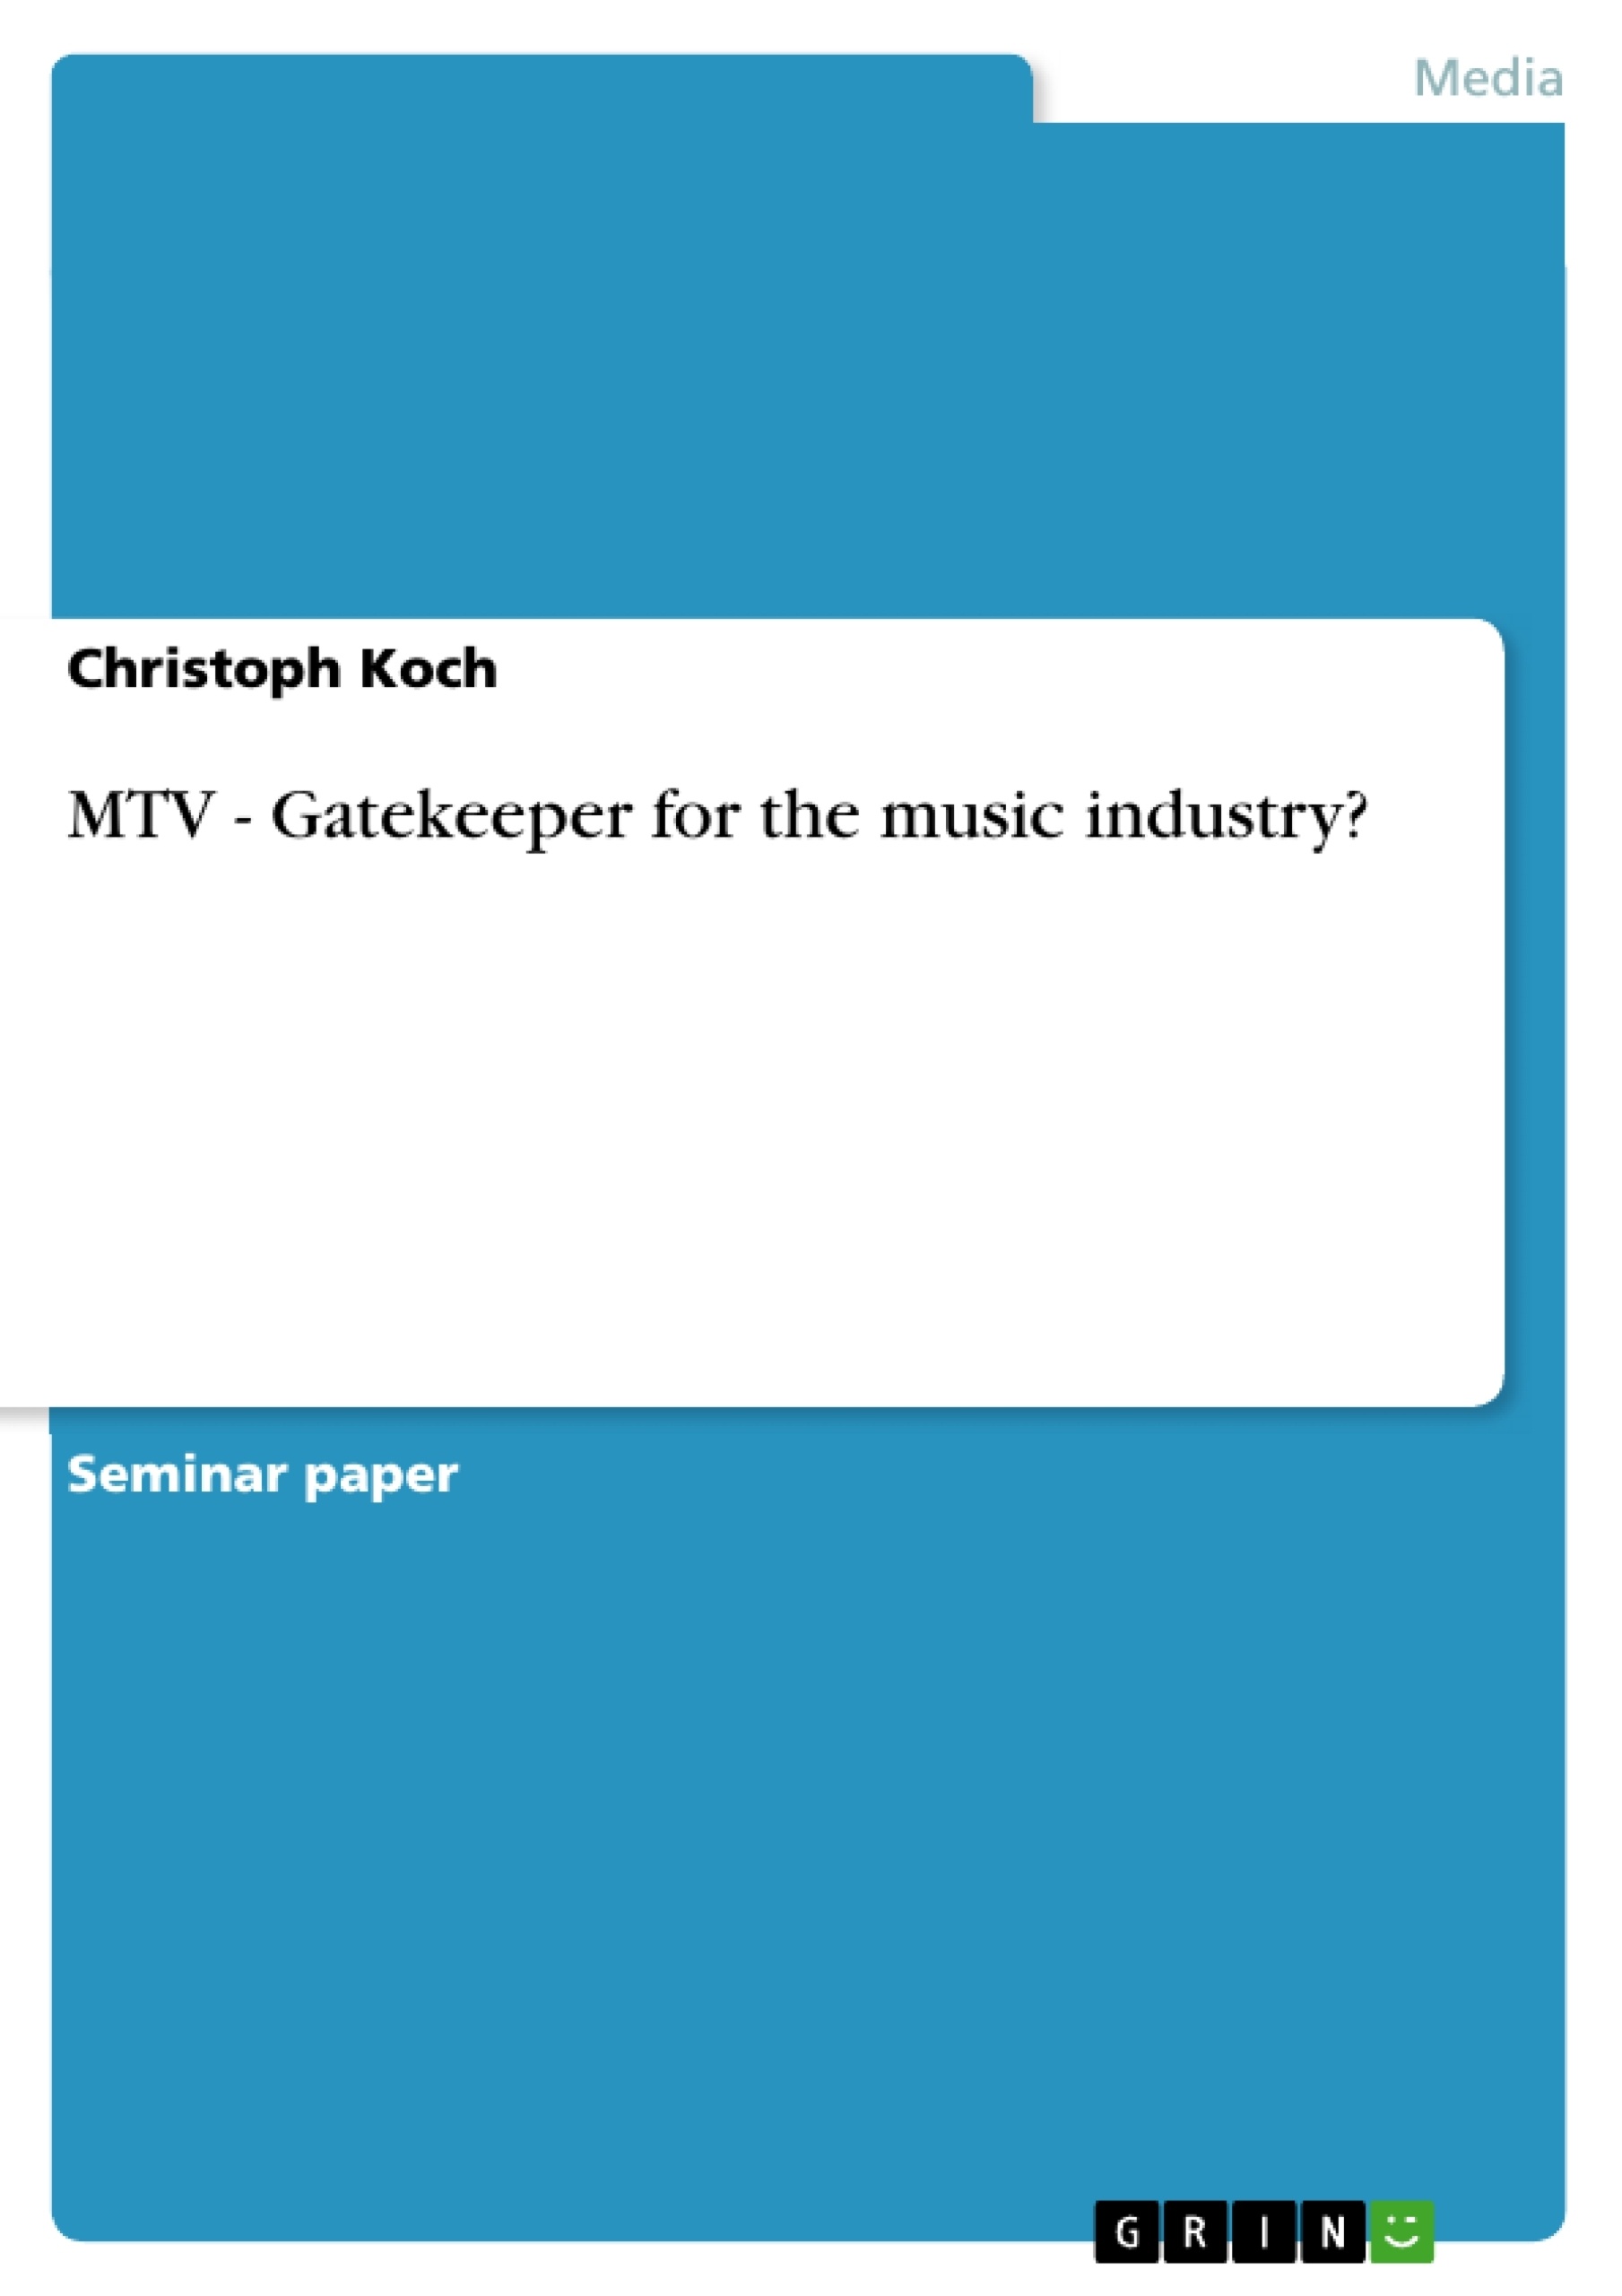 Título: MTV - Gatekeeper for the music industry?